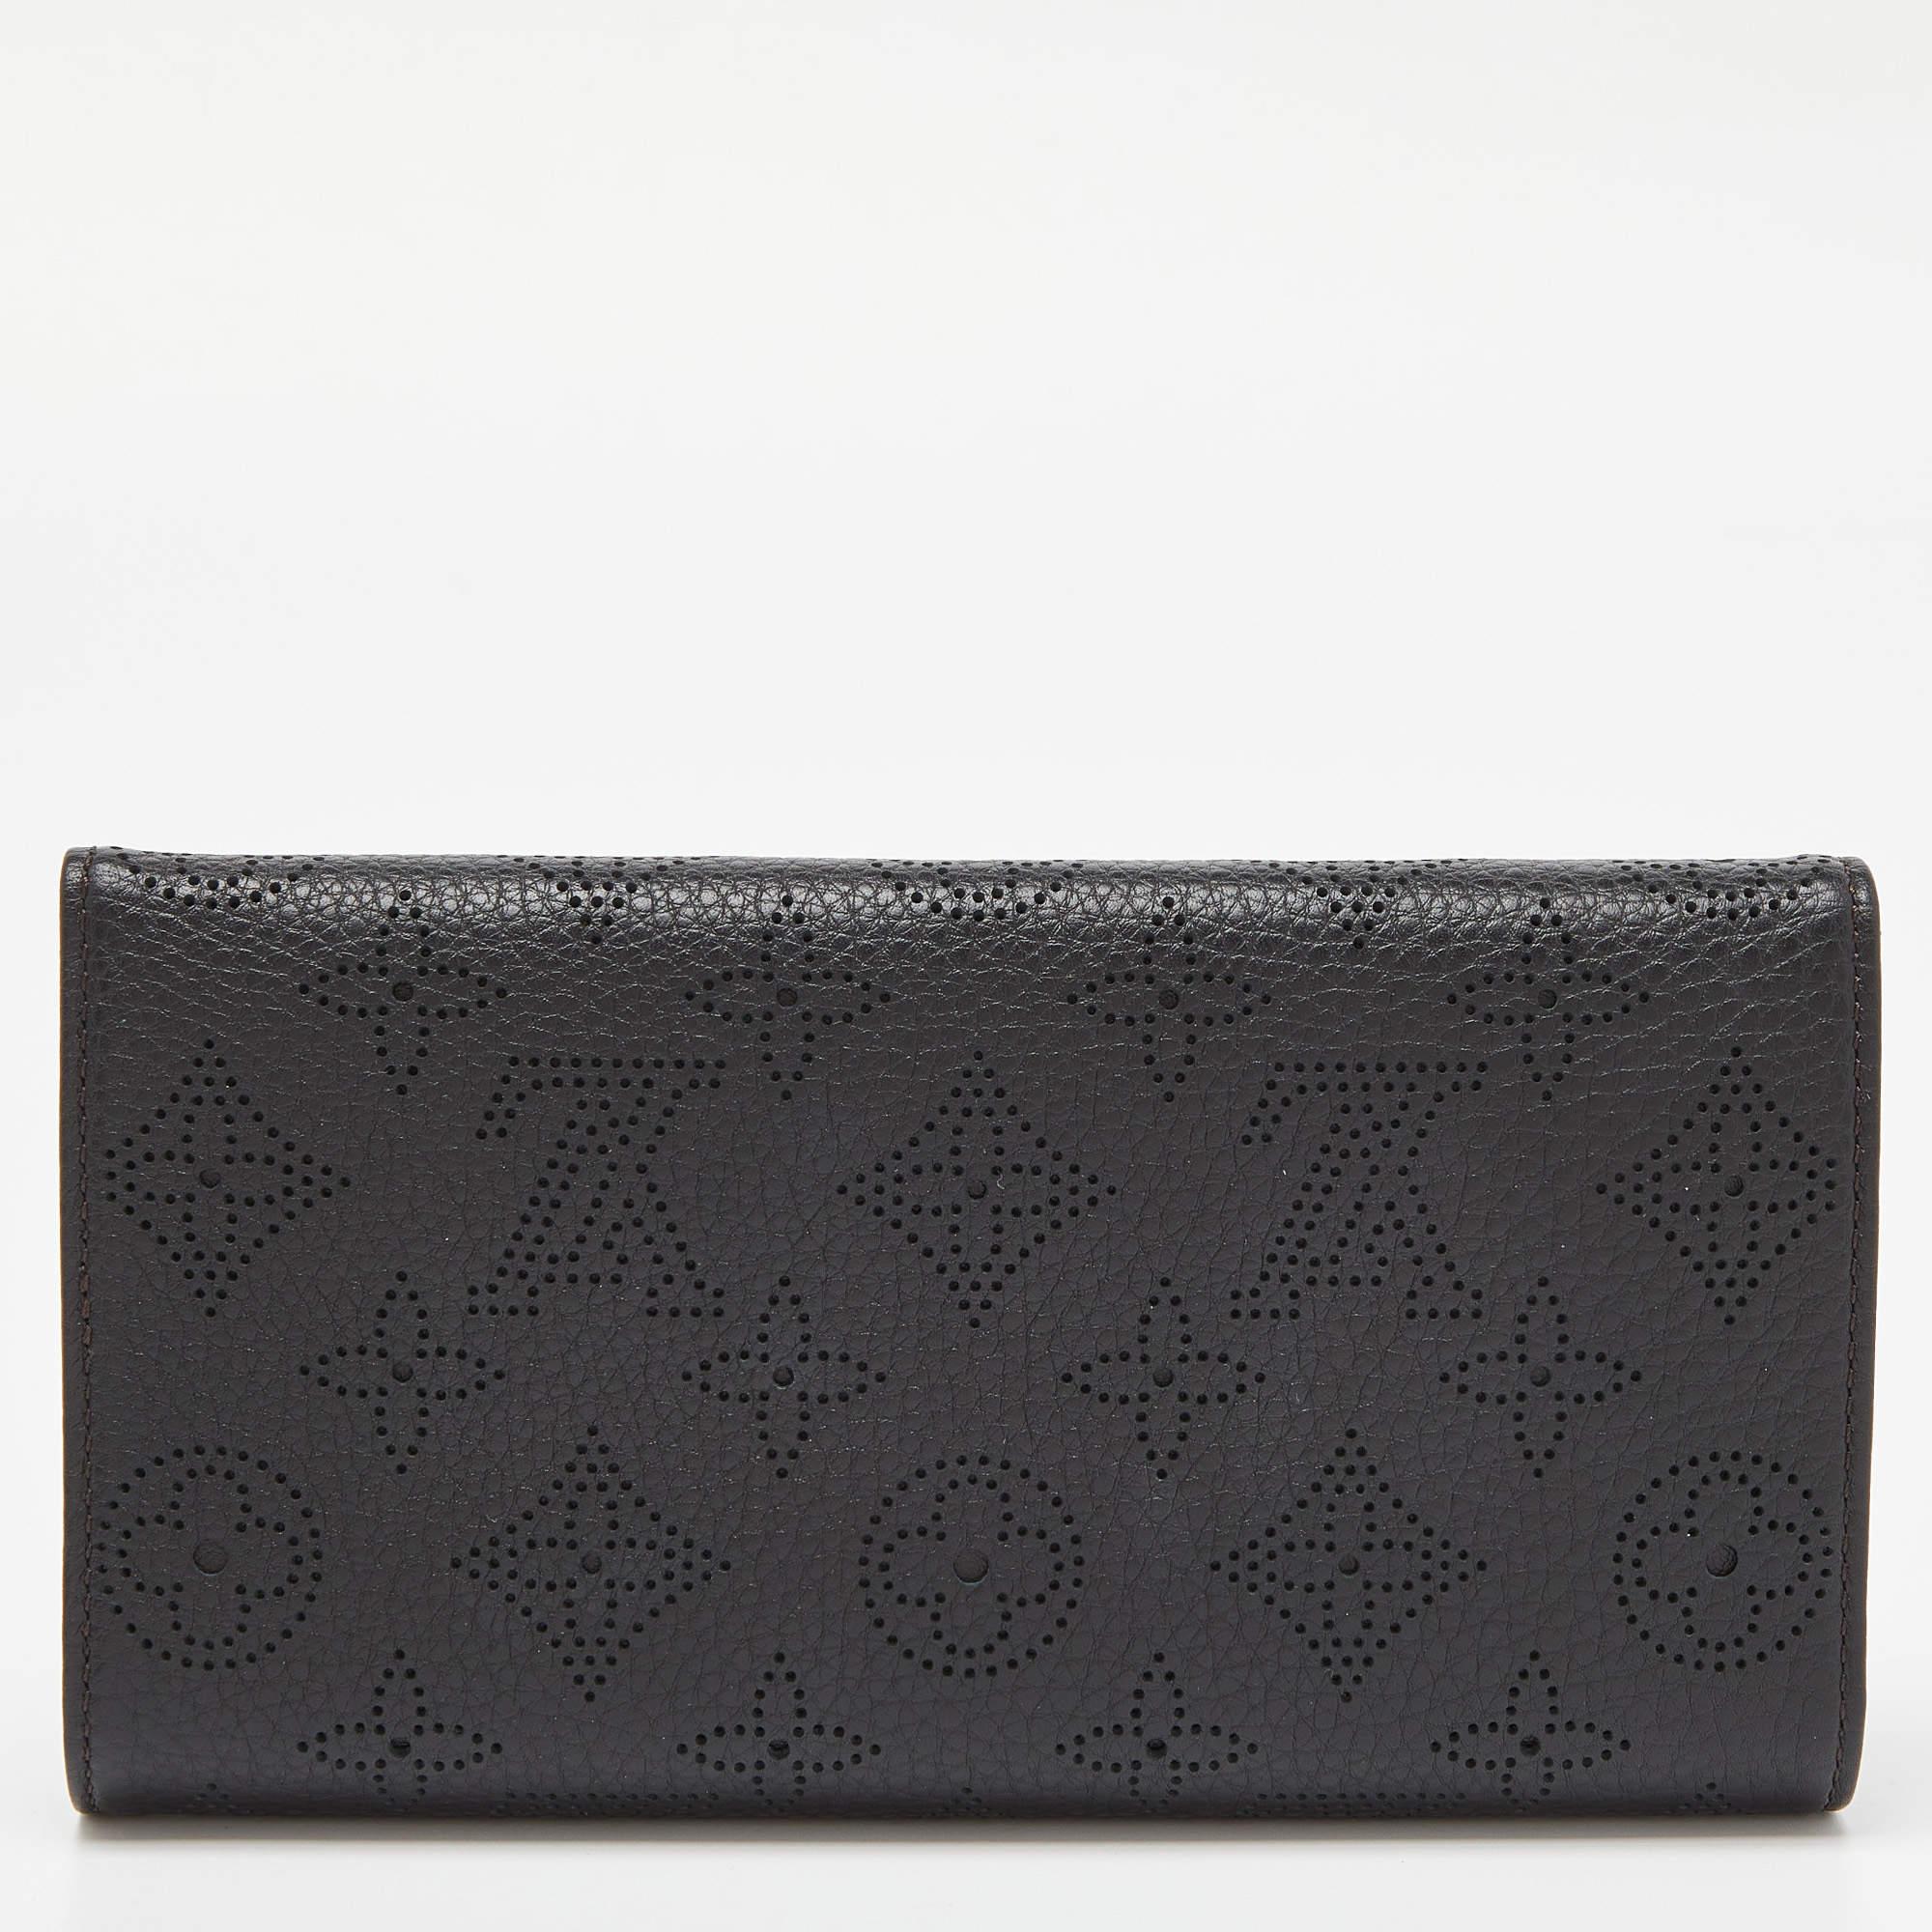 The gorgeous Amelia wallet has a flap design with a gold-tone lock to secure the interior. Made from black monogram Mahina leather, this Louis Vuitton creation features multiple card slots, a zipped compartment for change, and enough space for your